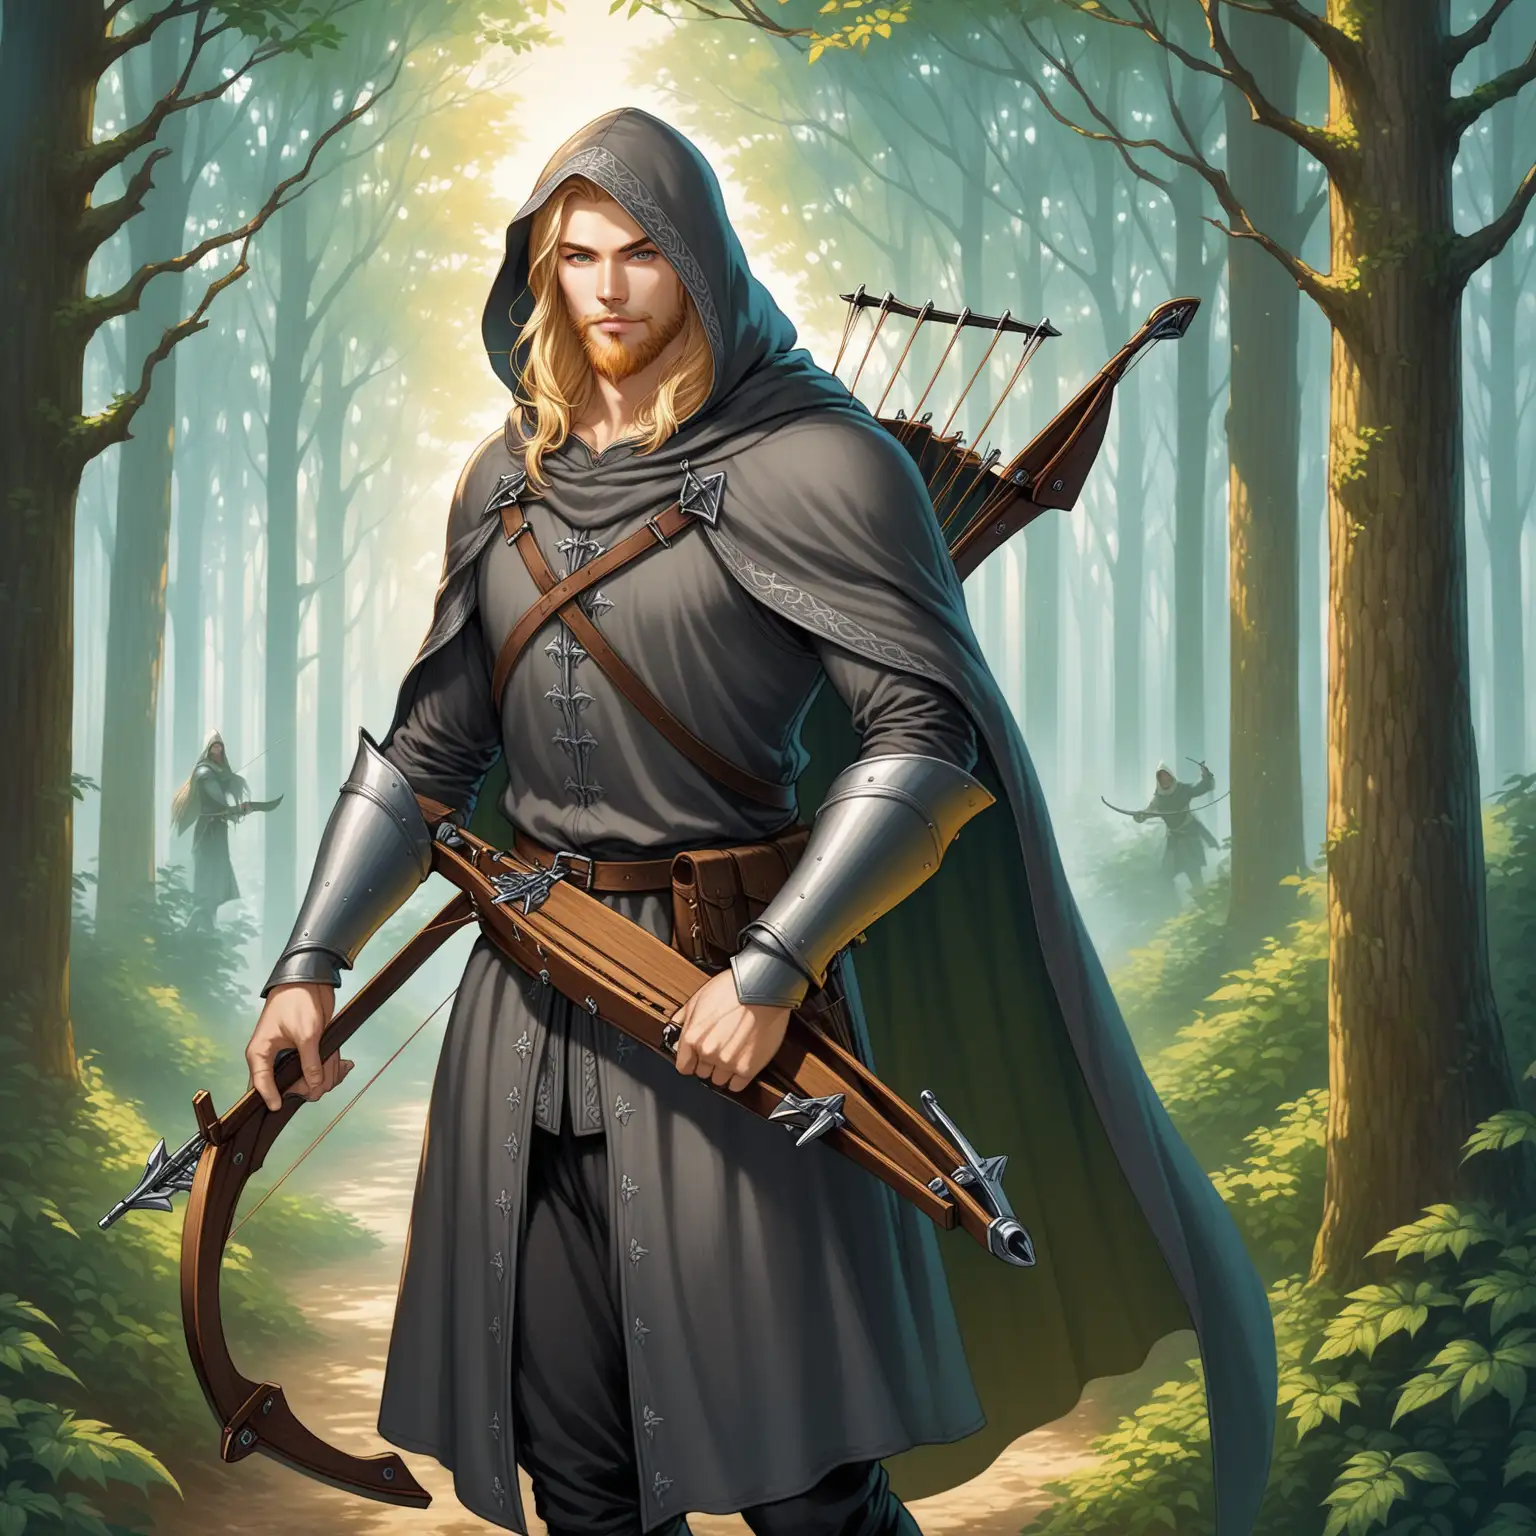 Medieval Archer with Crossbow in Forest Fantasy Scene